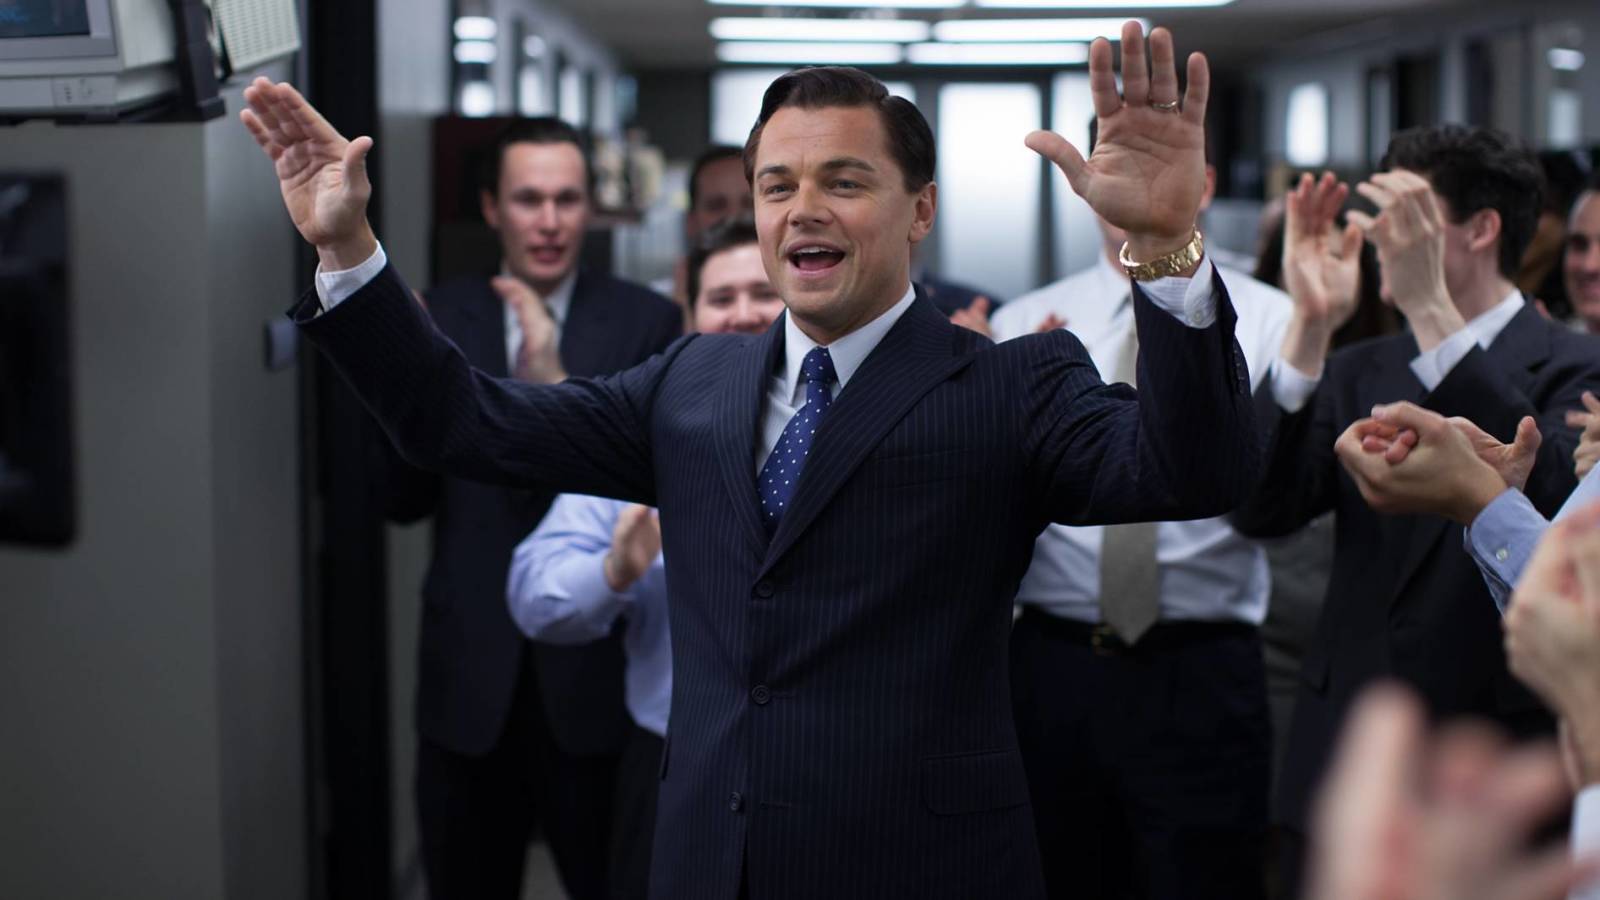 20 facts you might not know about 'The Wolf of Wall Street' | Yardbarker